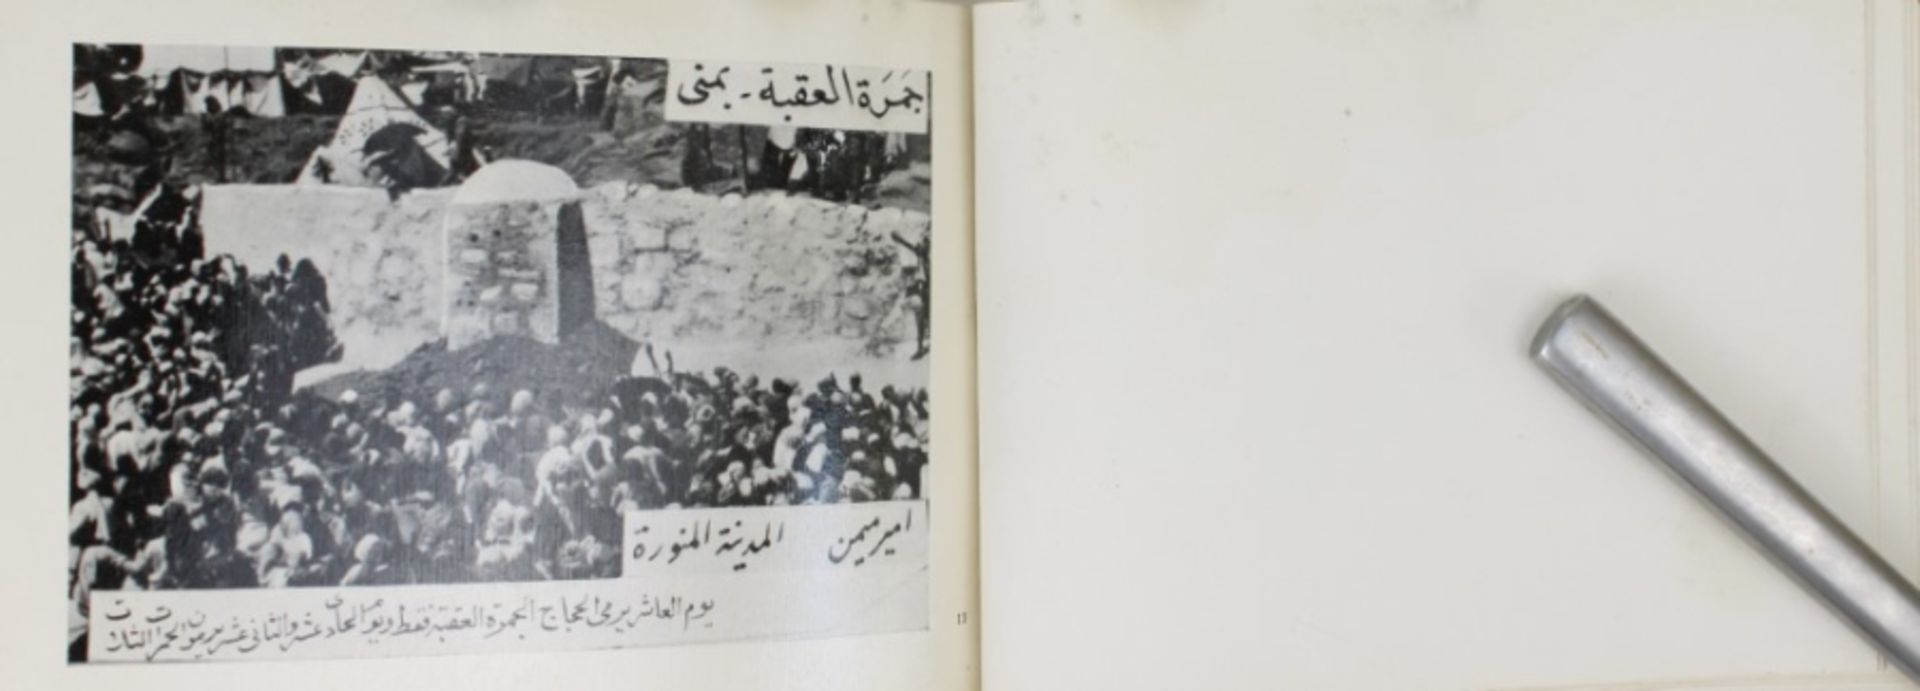 1930 Album with photographs of Mecca - Image 3 of 24